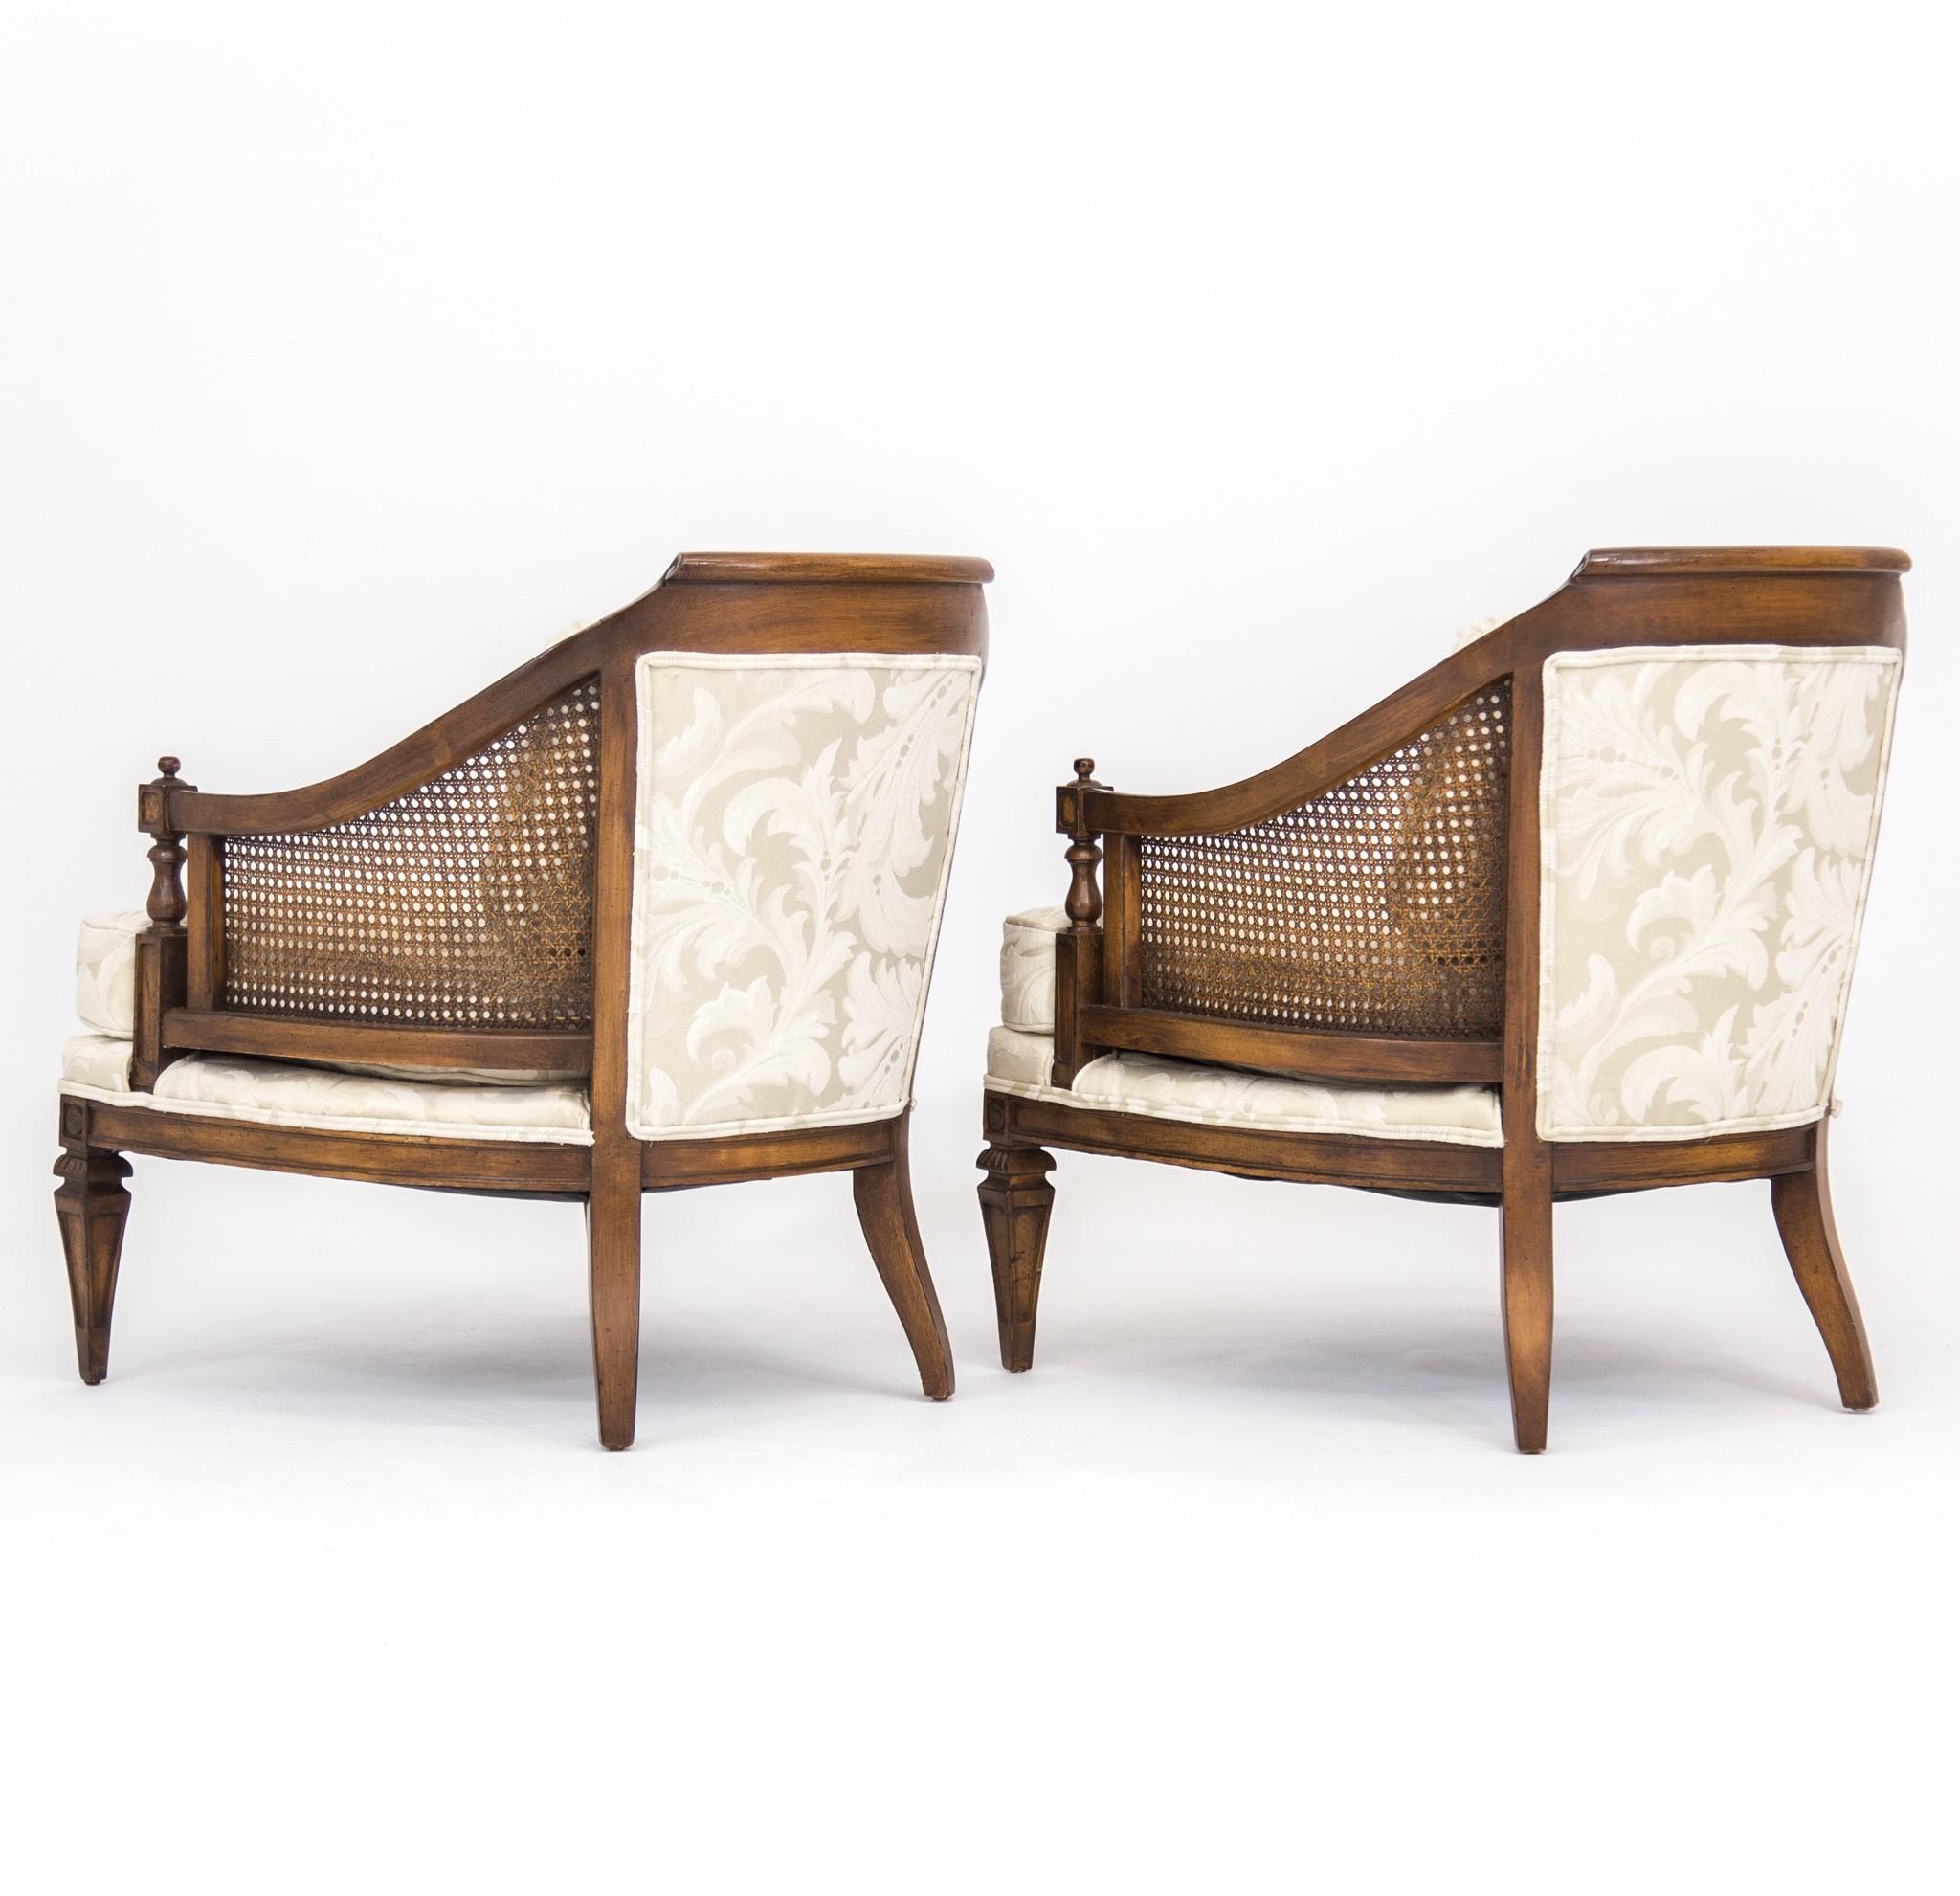 Louis XVI Pair of Mid-Century Walnut & Cane Barrel Back Club Chairs with White Upholstery